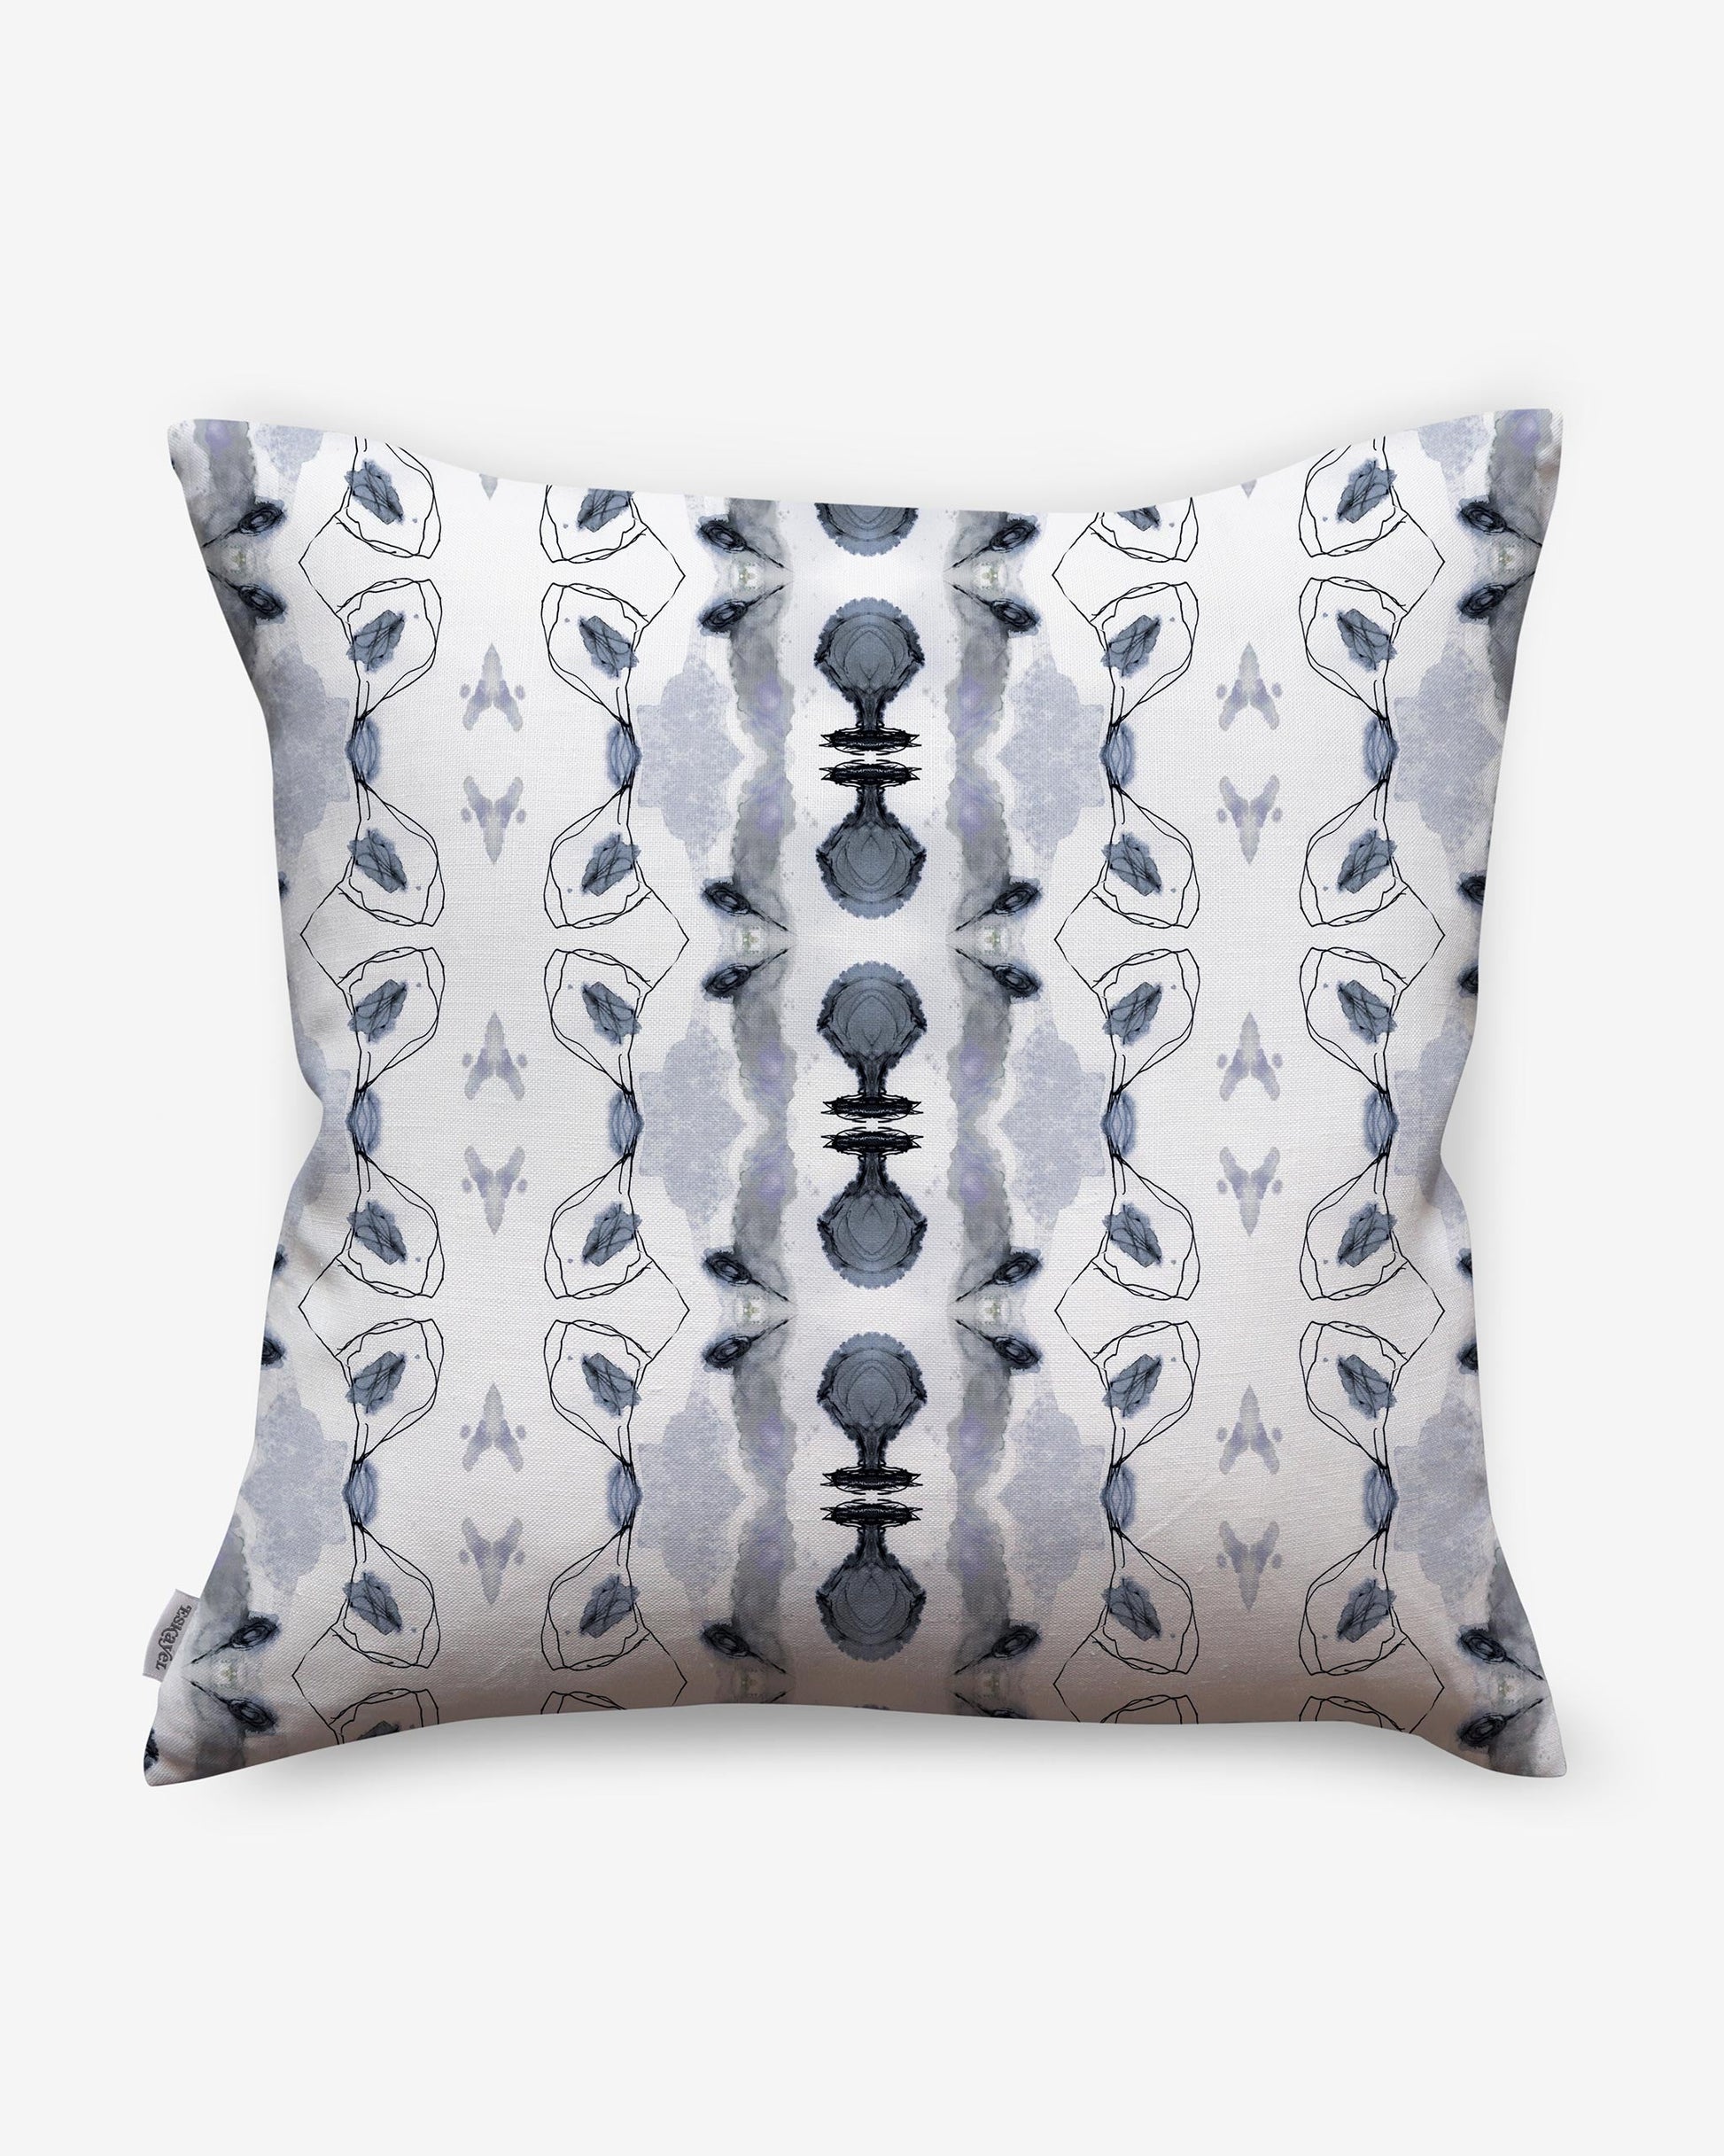 A Bali Stripe Pillow Indigo with a blue and white design on it